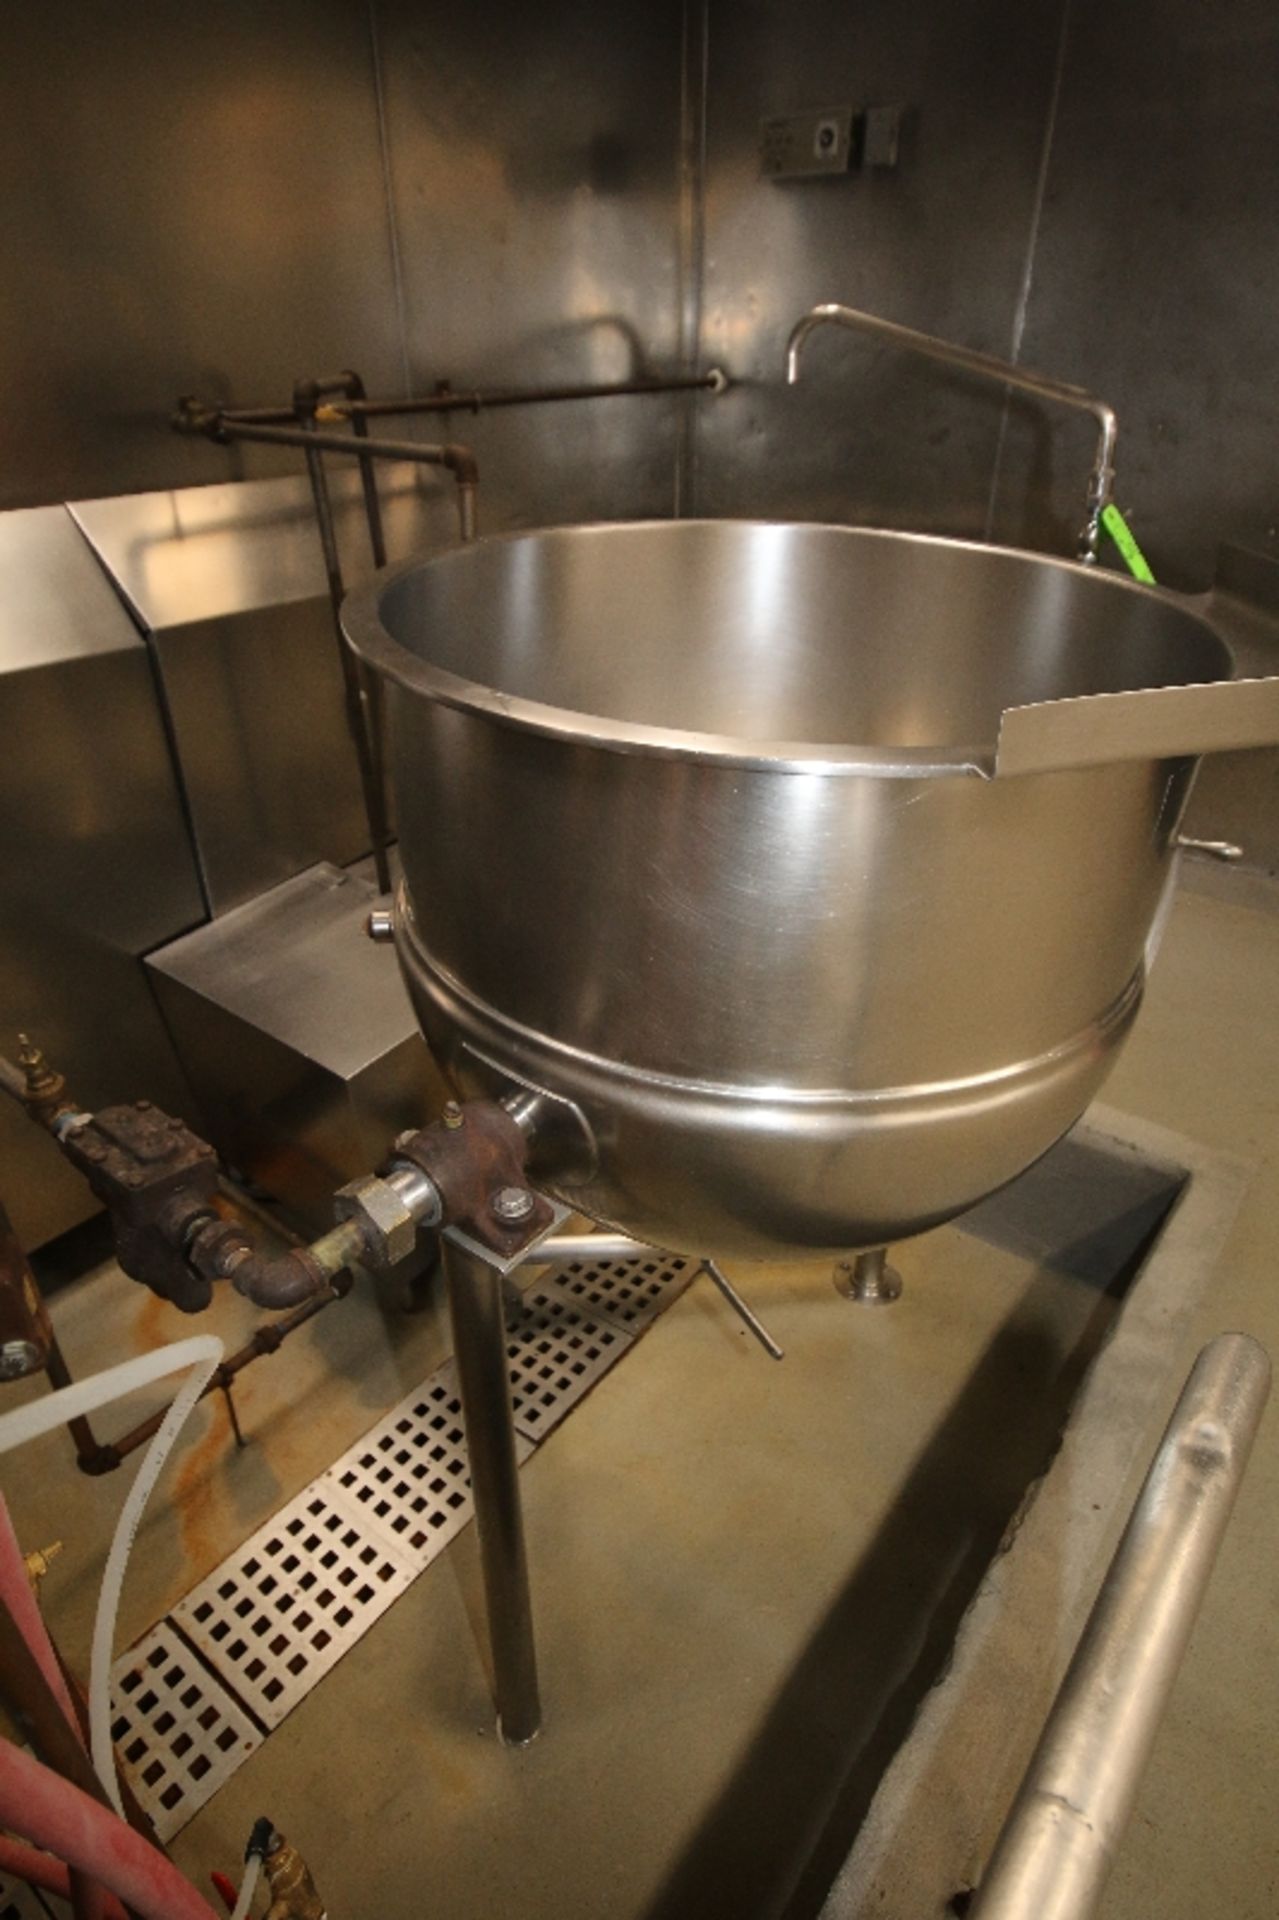 Groen 100 Gal. S/S Kettle, M/N DN-100, S/N 07321-1, Max. W.P. 100 PSI @ 338 F, -20 F @ 100 PSI (Soup - Image 2 of 3